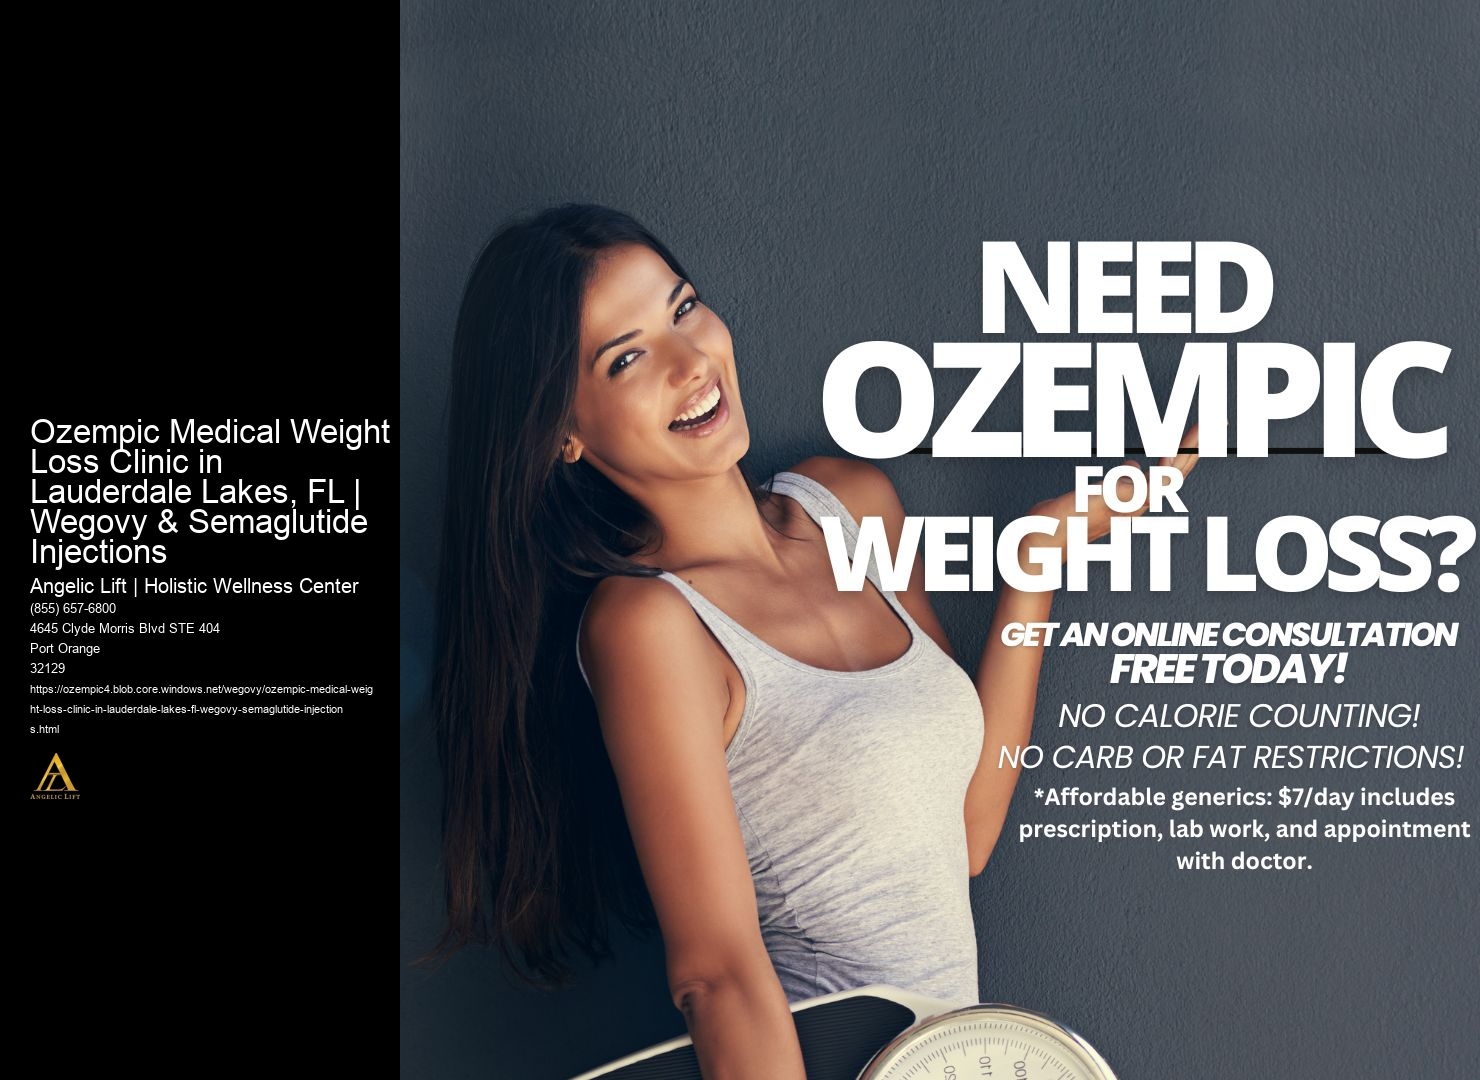 Ozempic Medical Weight Loss Clinic in Lauderdale Lakes, FL | Wegovy & Semaglutide Injections